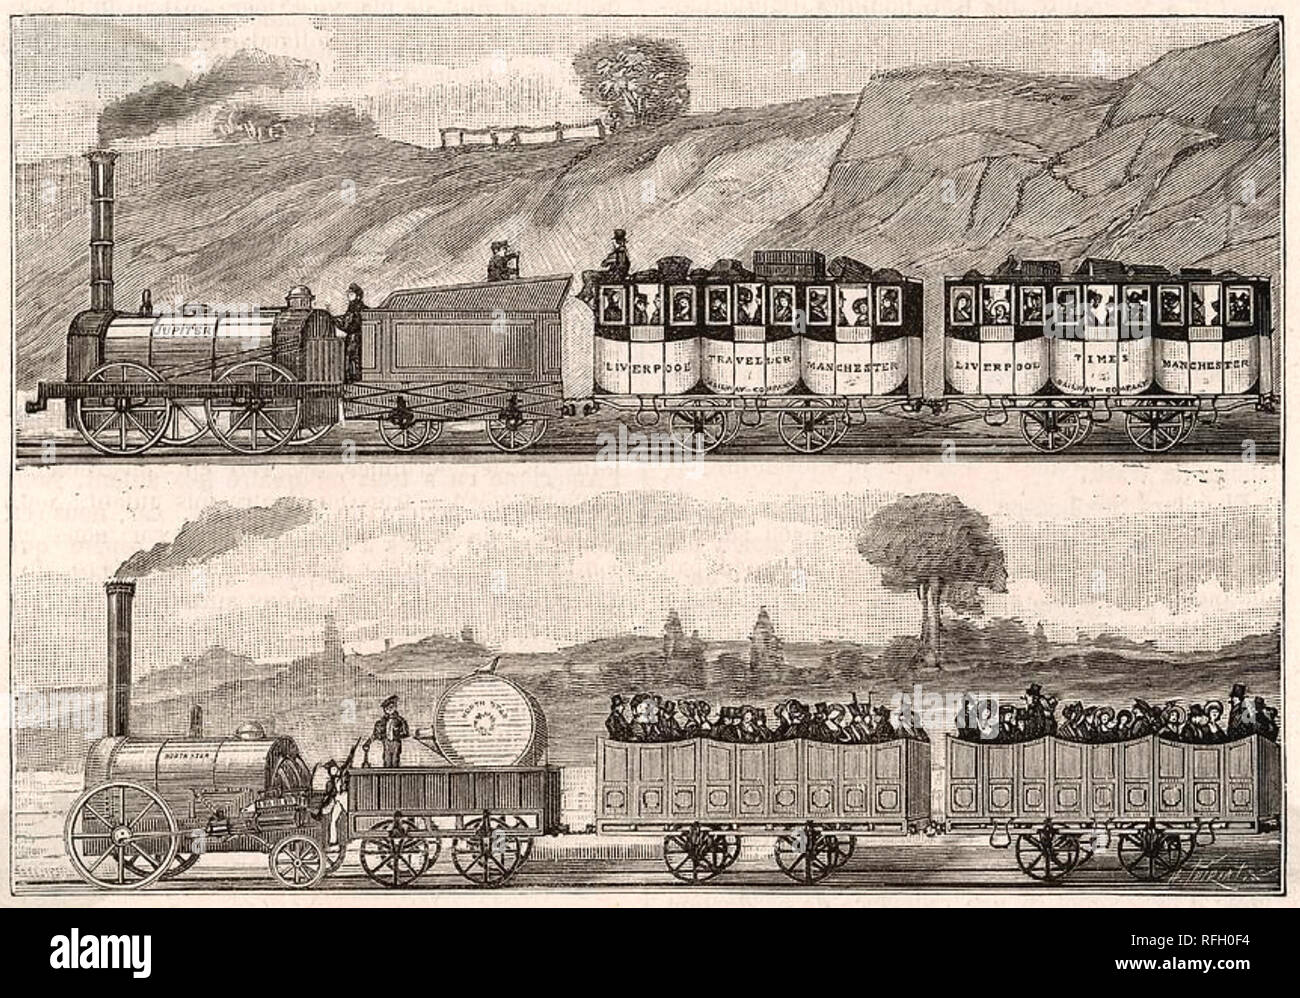 LIVERPOOL AND MANCHESTER RAILWAY in an 1830 engraving Stock Photo